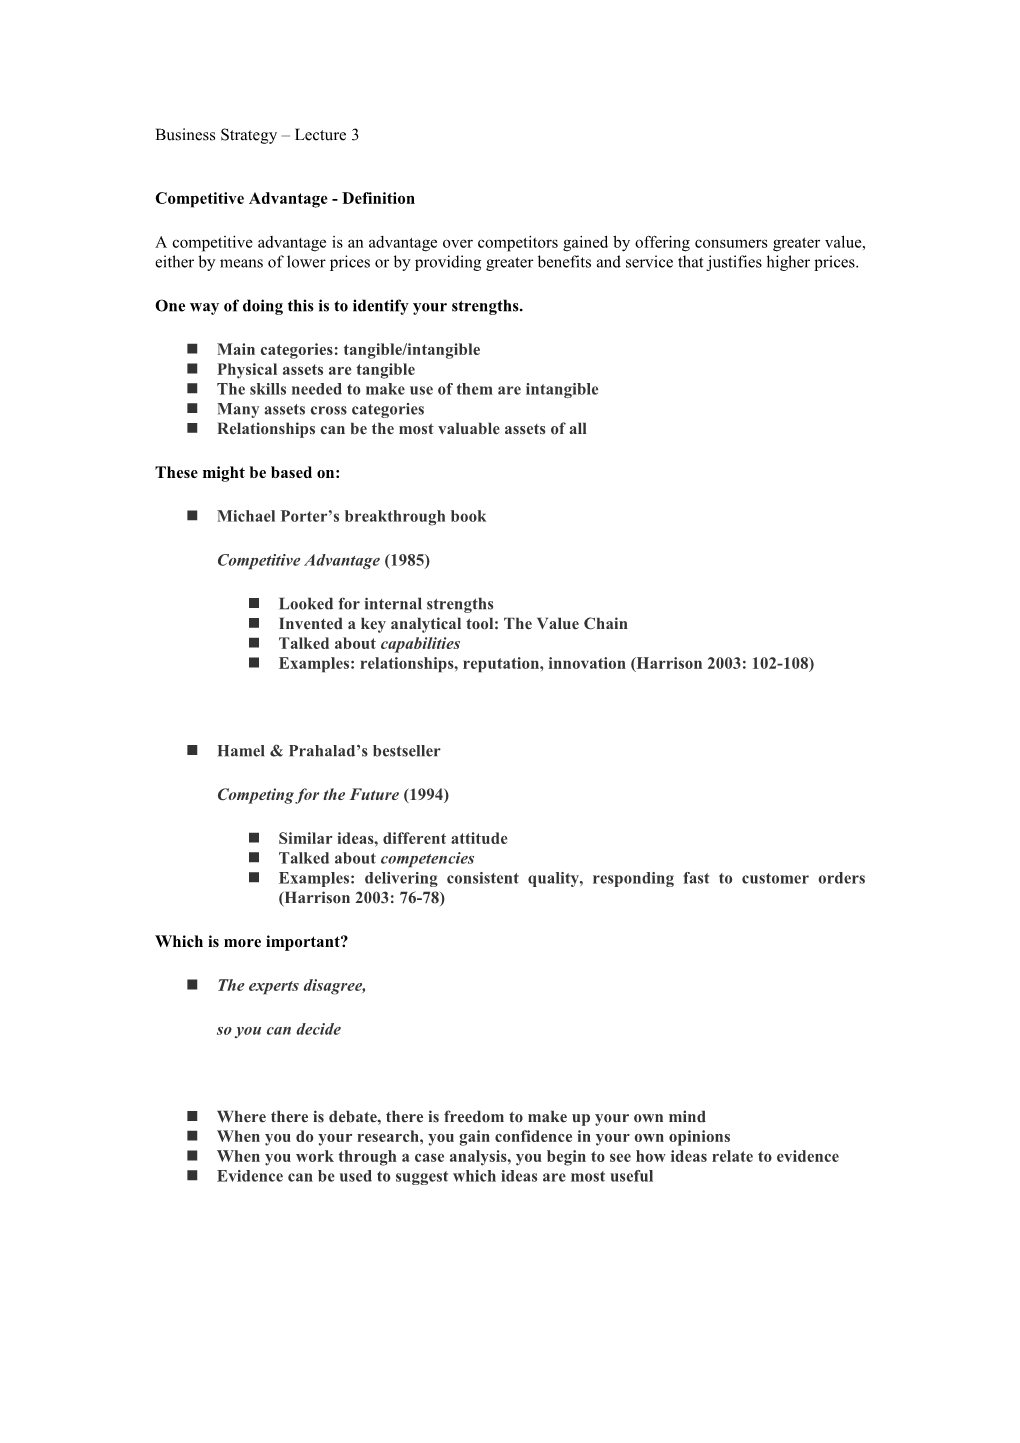 Business Strategy Lecture 3 Worksheet